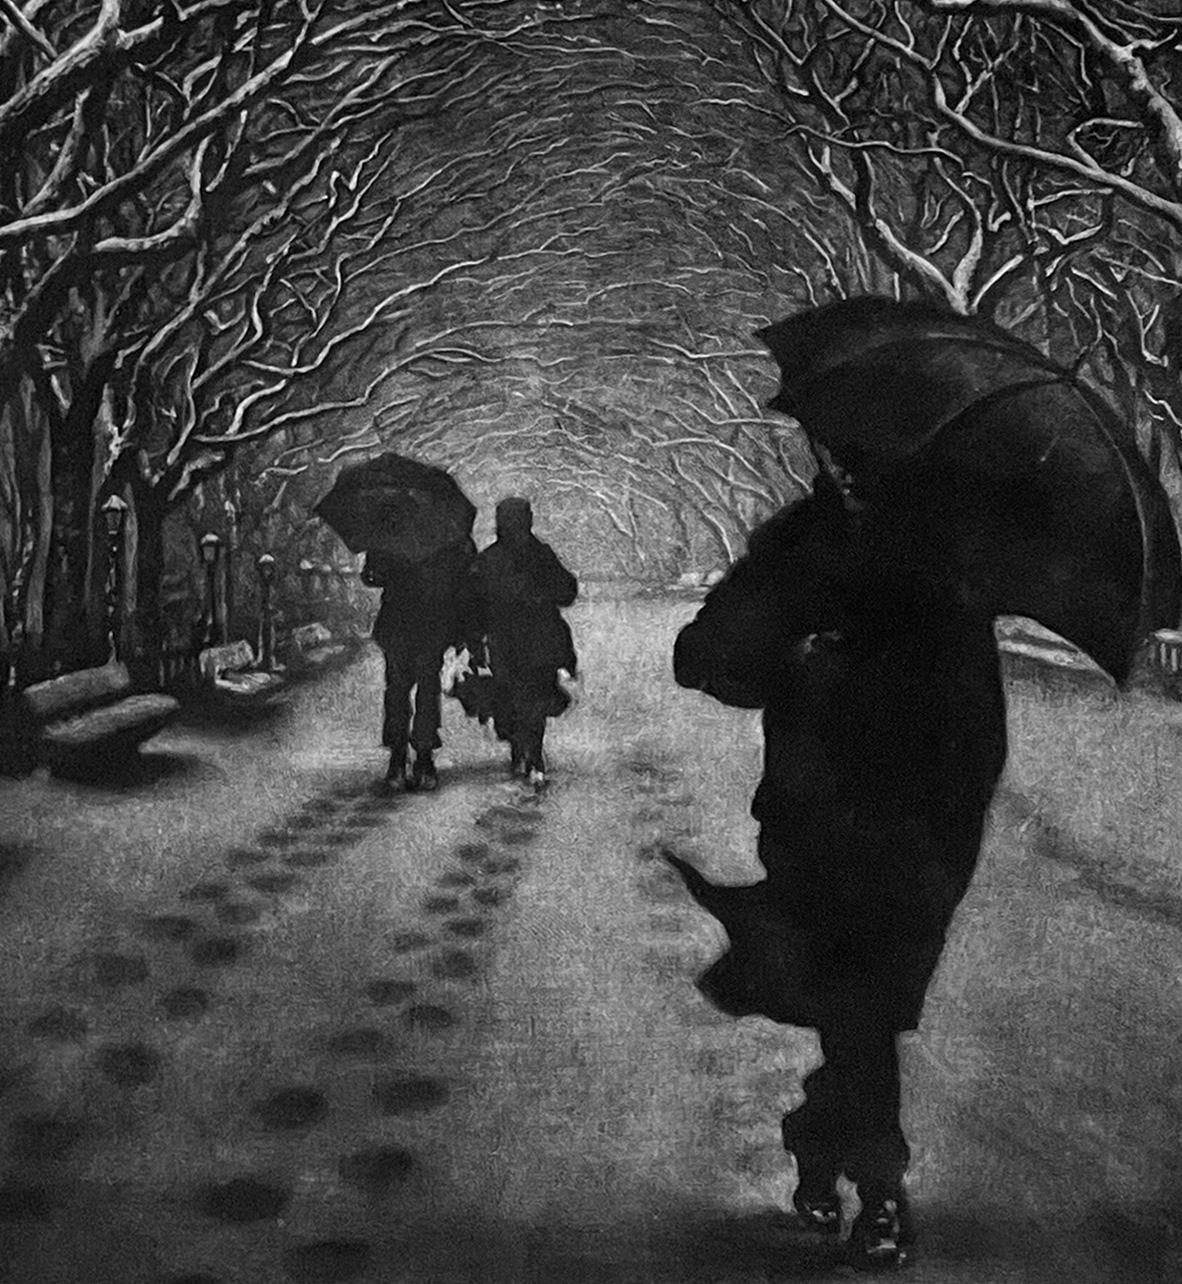 Werger's mezzotint prints are masterful at capturing a mood, and suggesting a story for the viewer to complete. Anonymous pedestrians passing on a snowy walk through Central Park. Umbrella's, reflections of rain on pavement, and the movement of